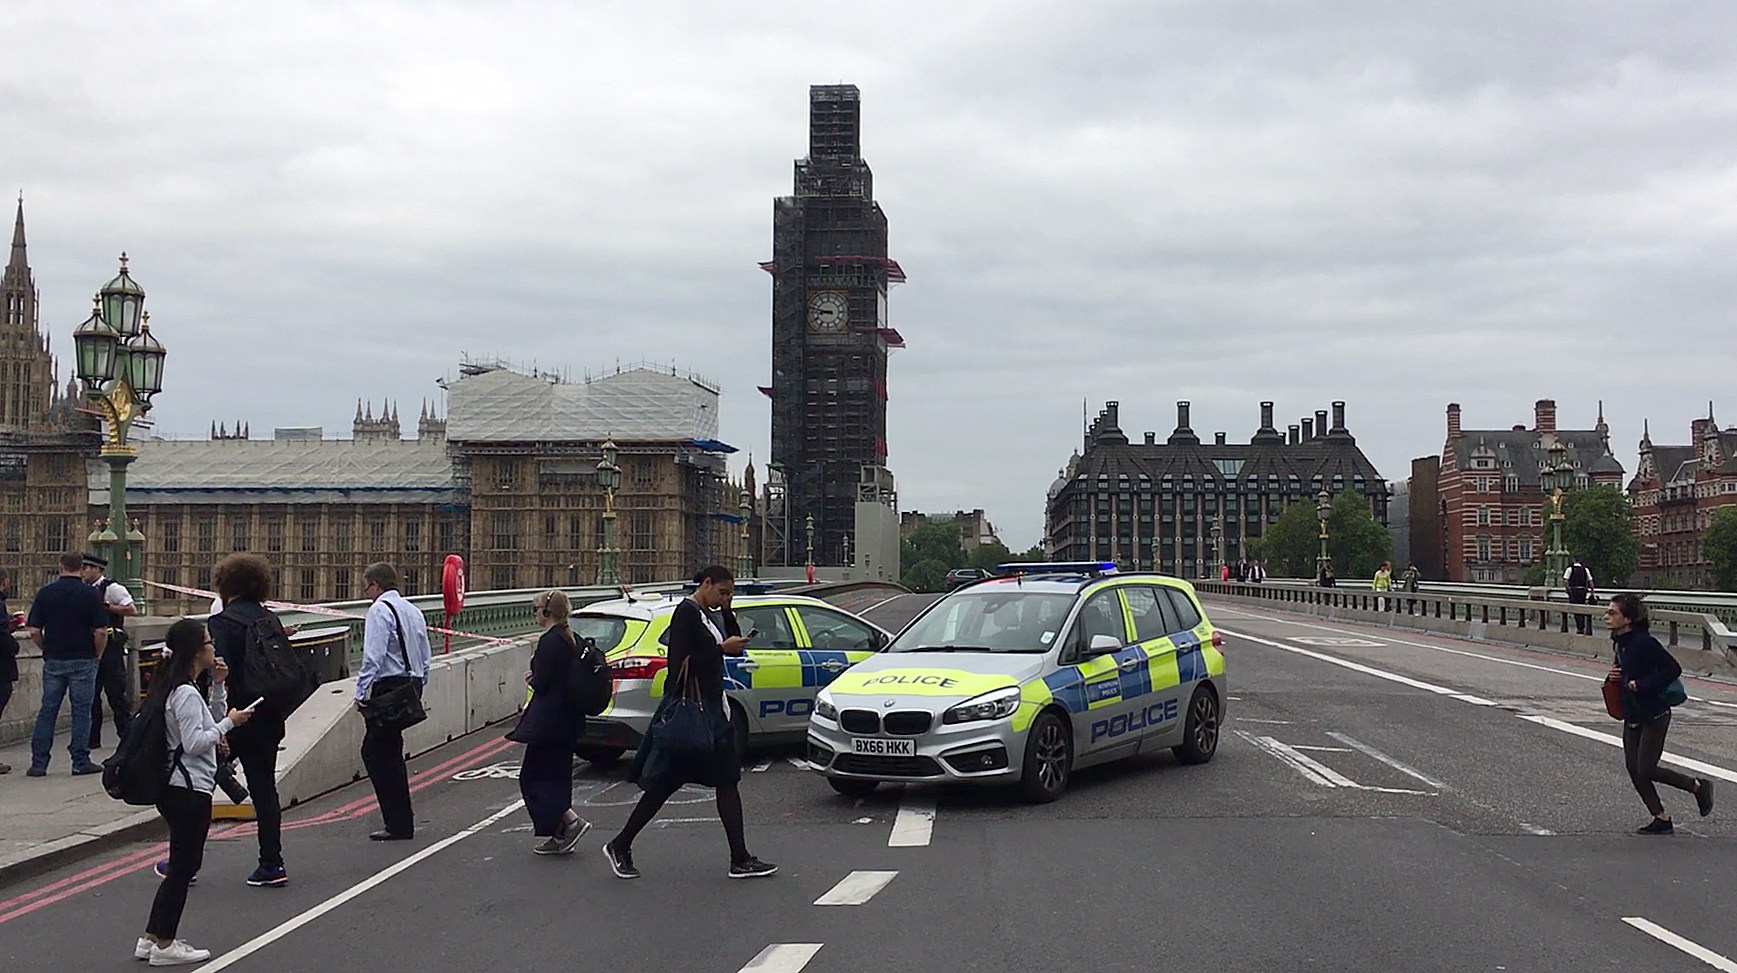 A video grab taken from AFP TV video footage shows police officers cordonning off Westminster Bridge, leading to Parliament Square in central London on August 14, 2018, after a car was driven into barriers at the Houses of Parliament. (WILLIAM EDWARDS/AFP/Getty Images)